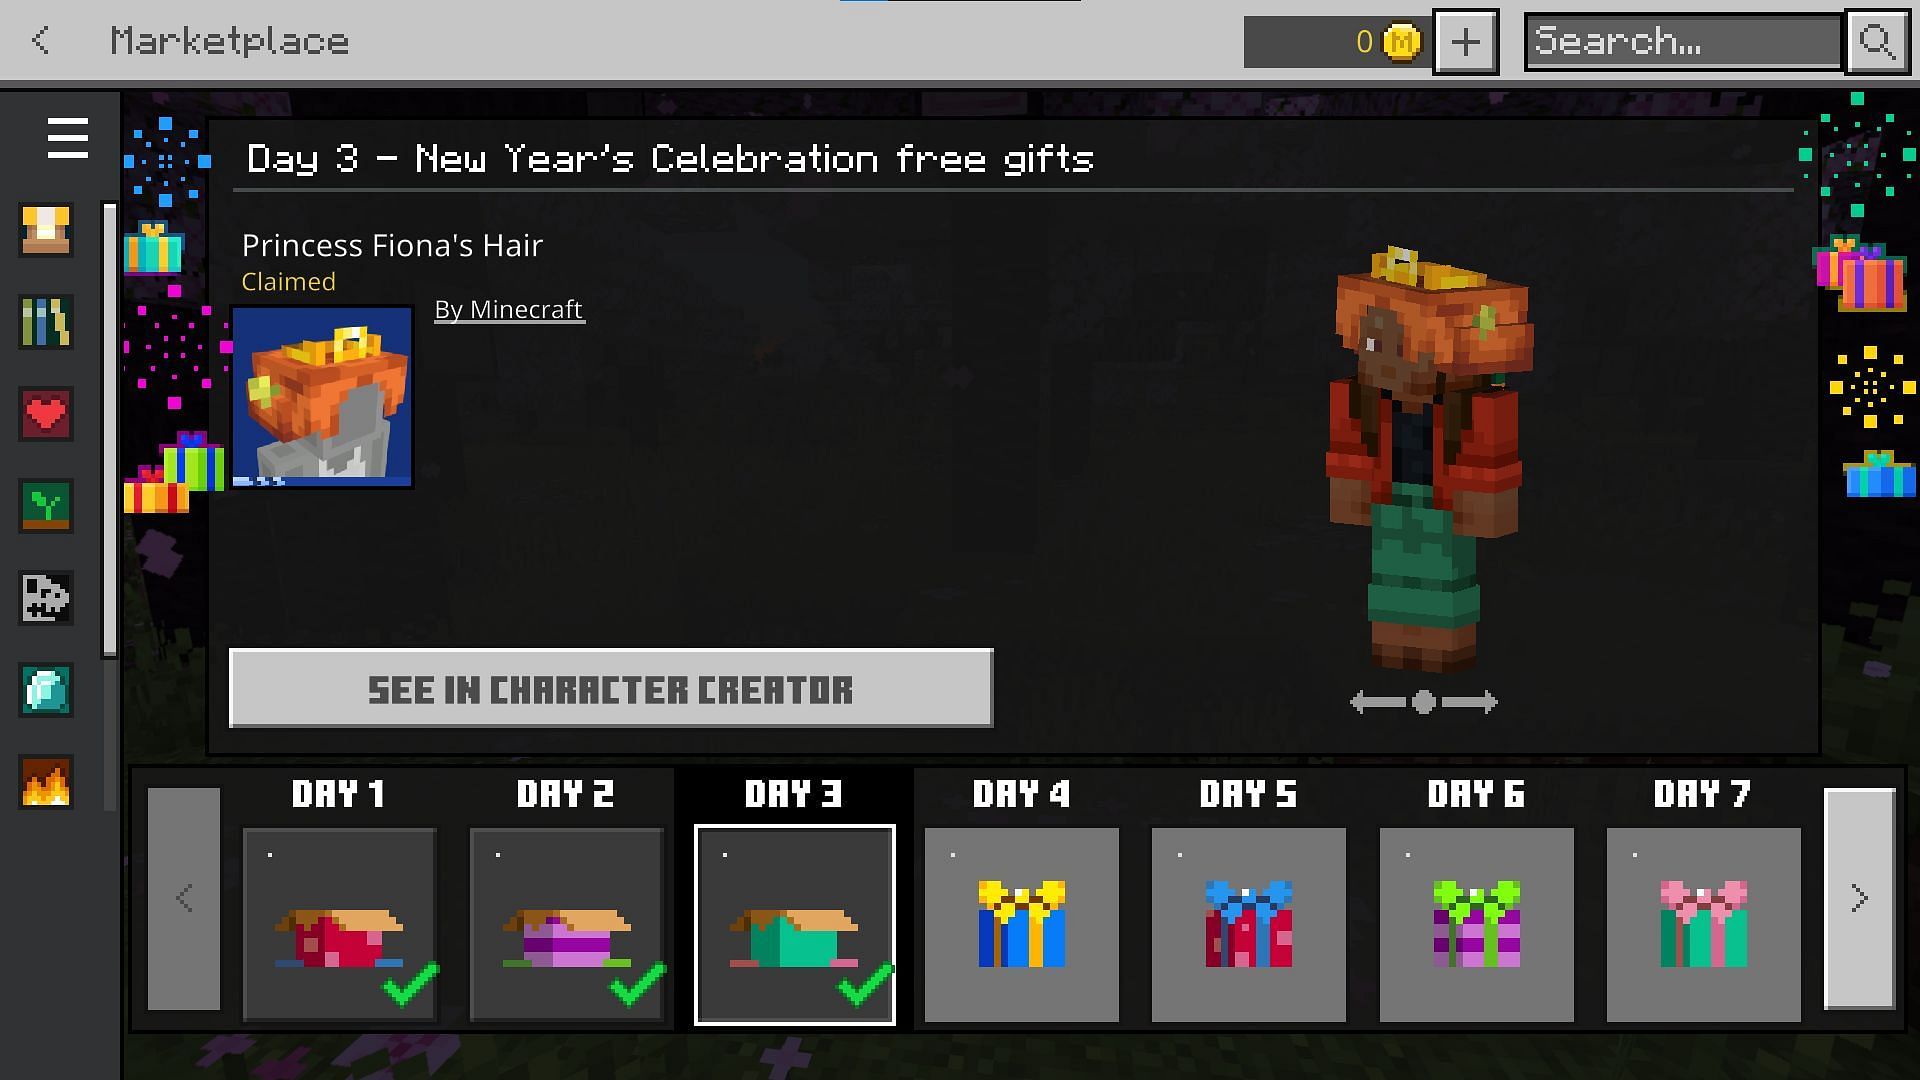 Minecraft players can collect 21 Universal Studios-related cosmetics for the New Year